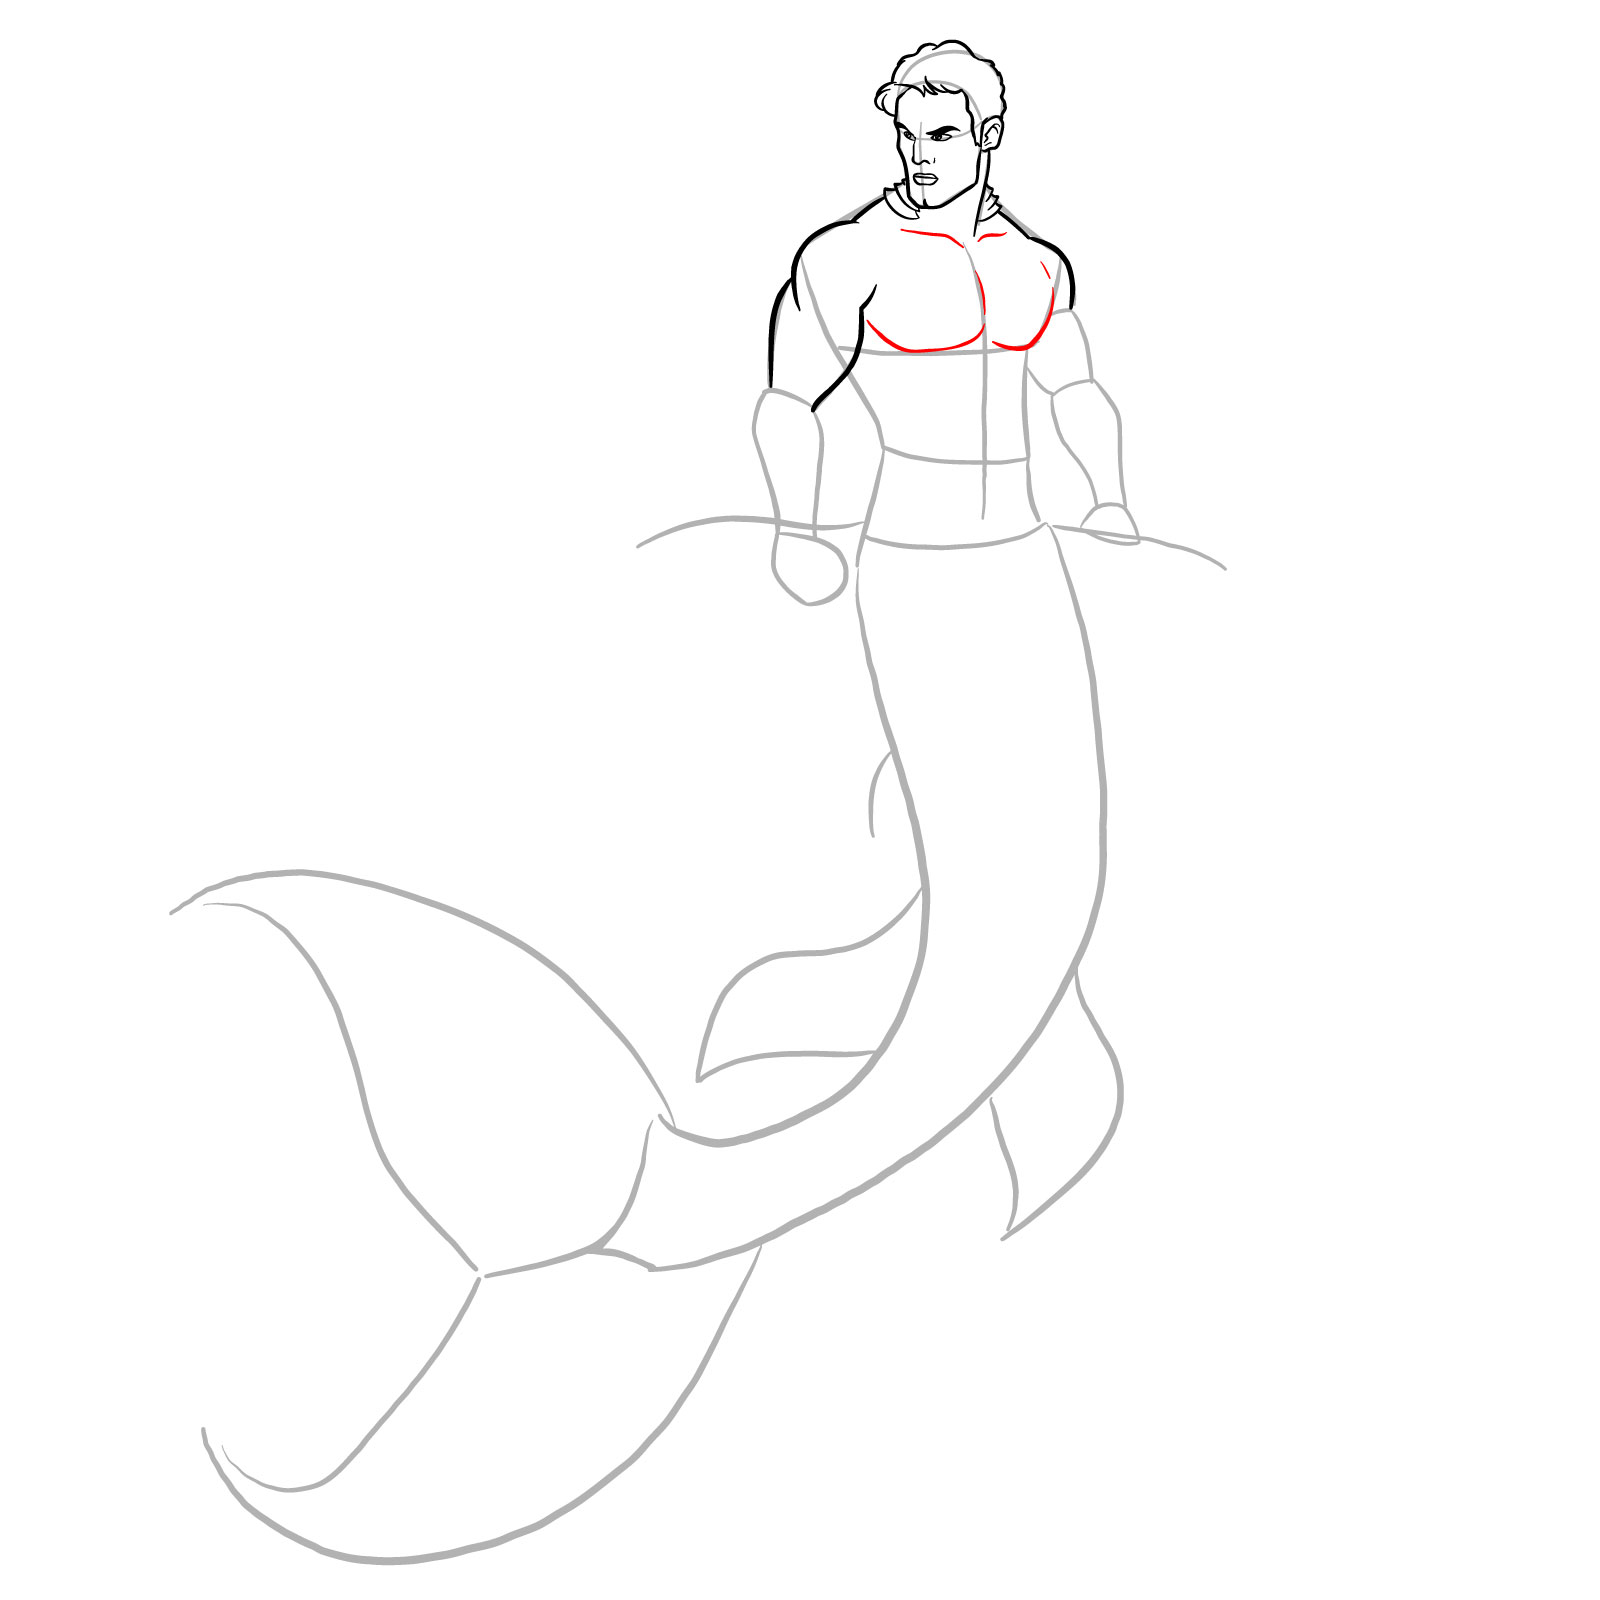 How to draw a Merman - step 14